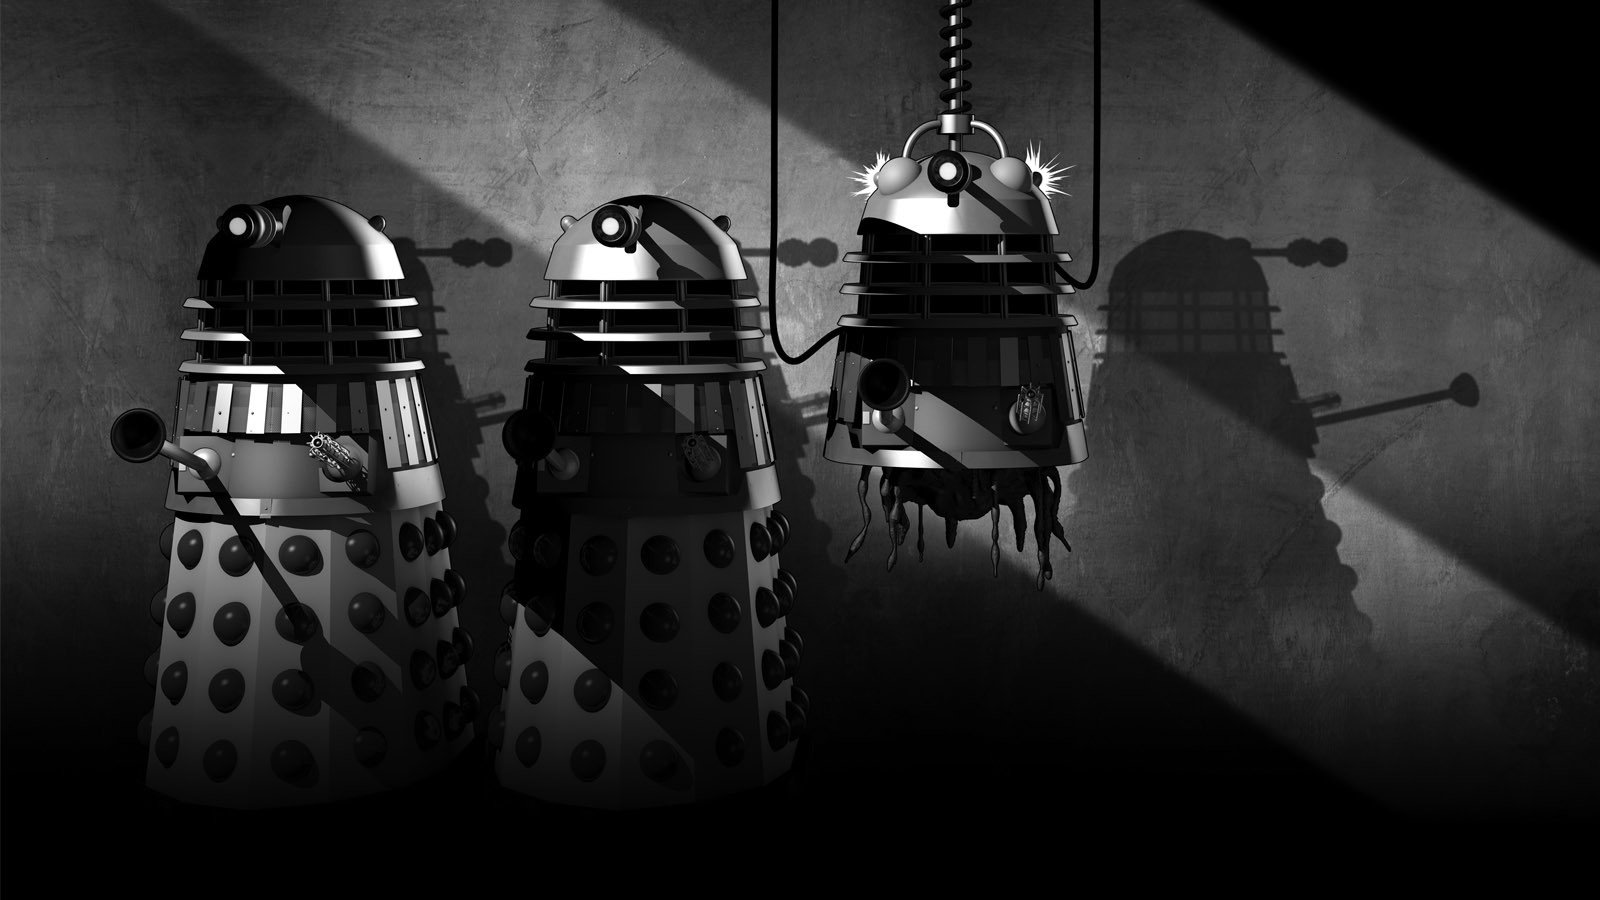 Will Doctor Who Missing Episode Animations Continue? “This Is It For Us”, Says Gary Russell